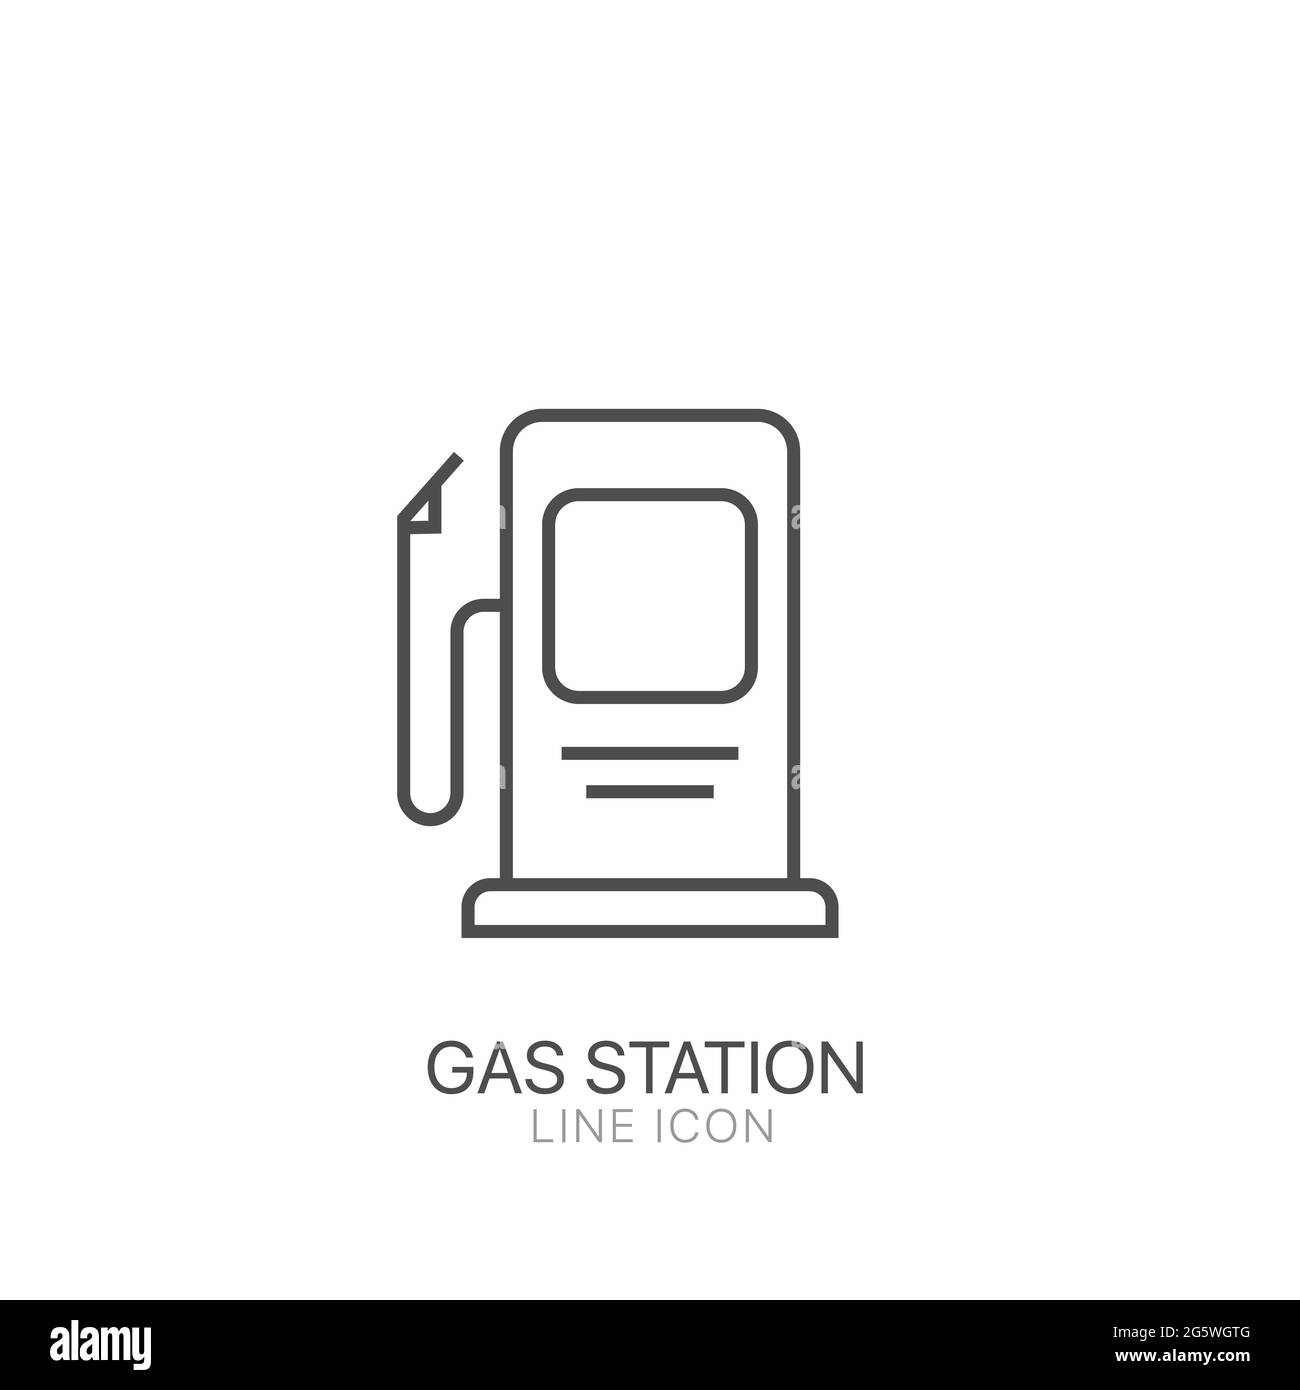 Gas station outline vector icon. Editable stroke Petrol station symbol Stock Vector